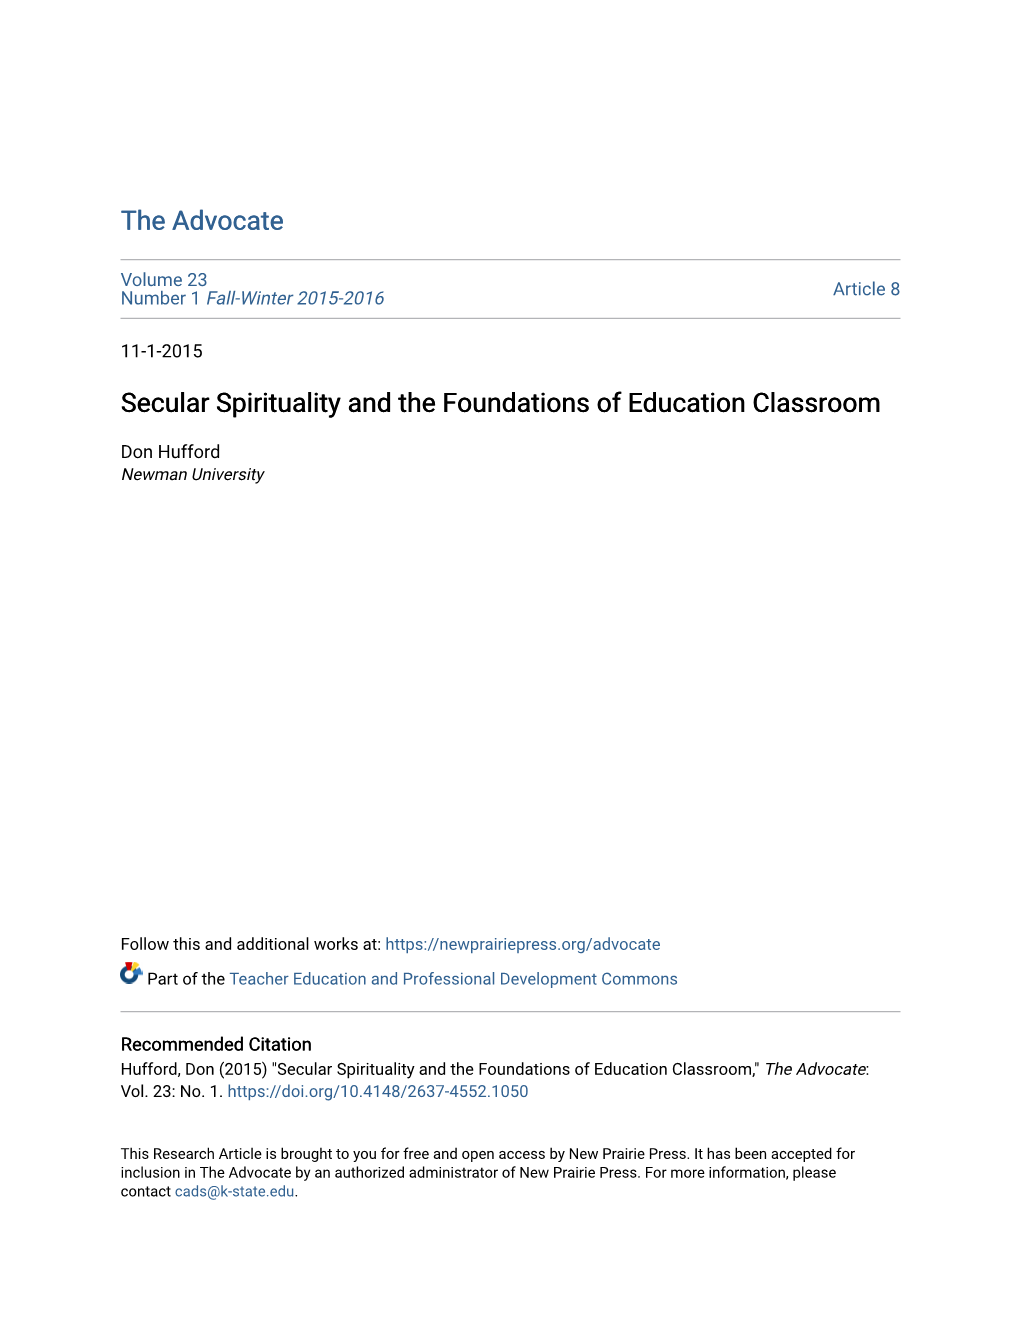 Secular Spirituality and the Foundations of Education Classroom